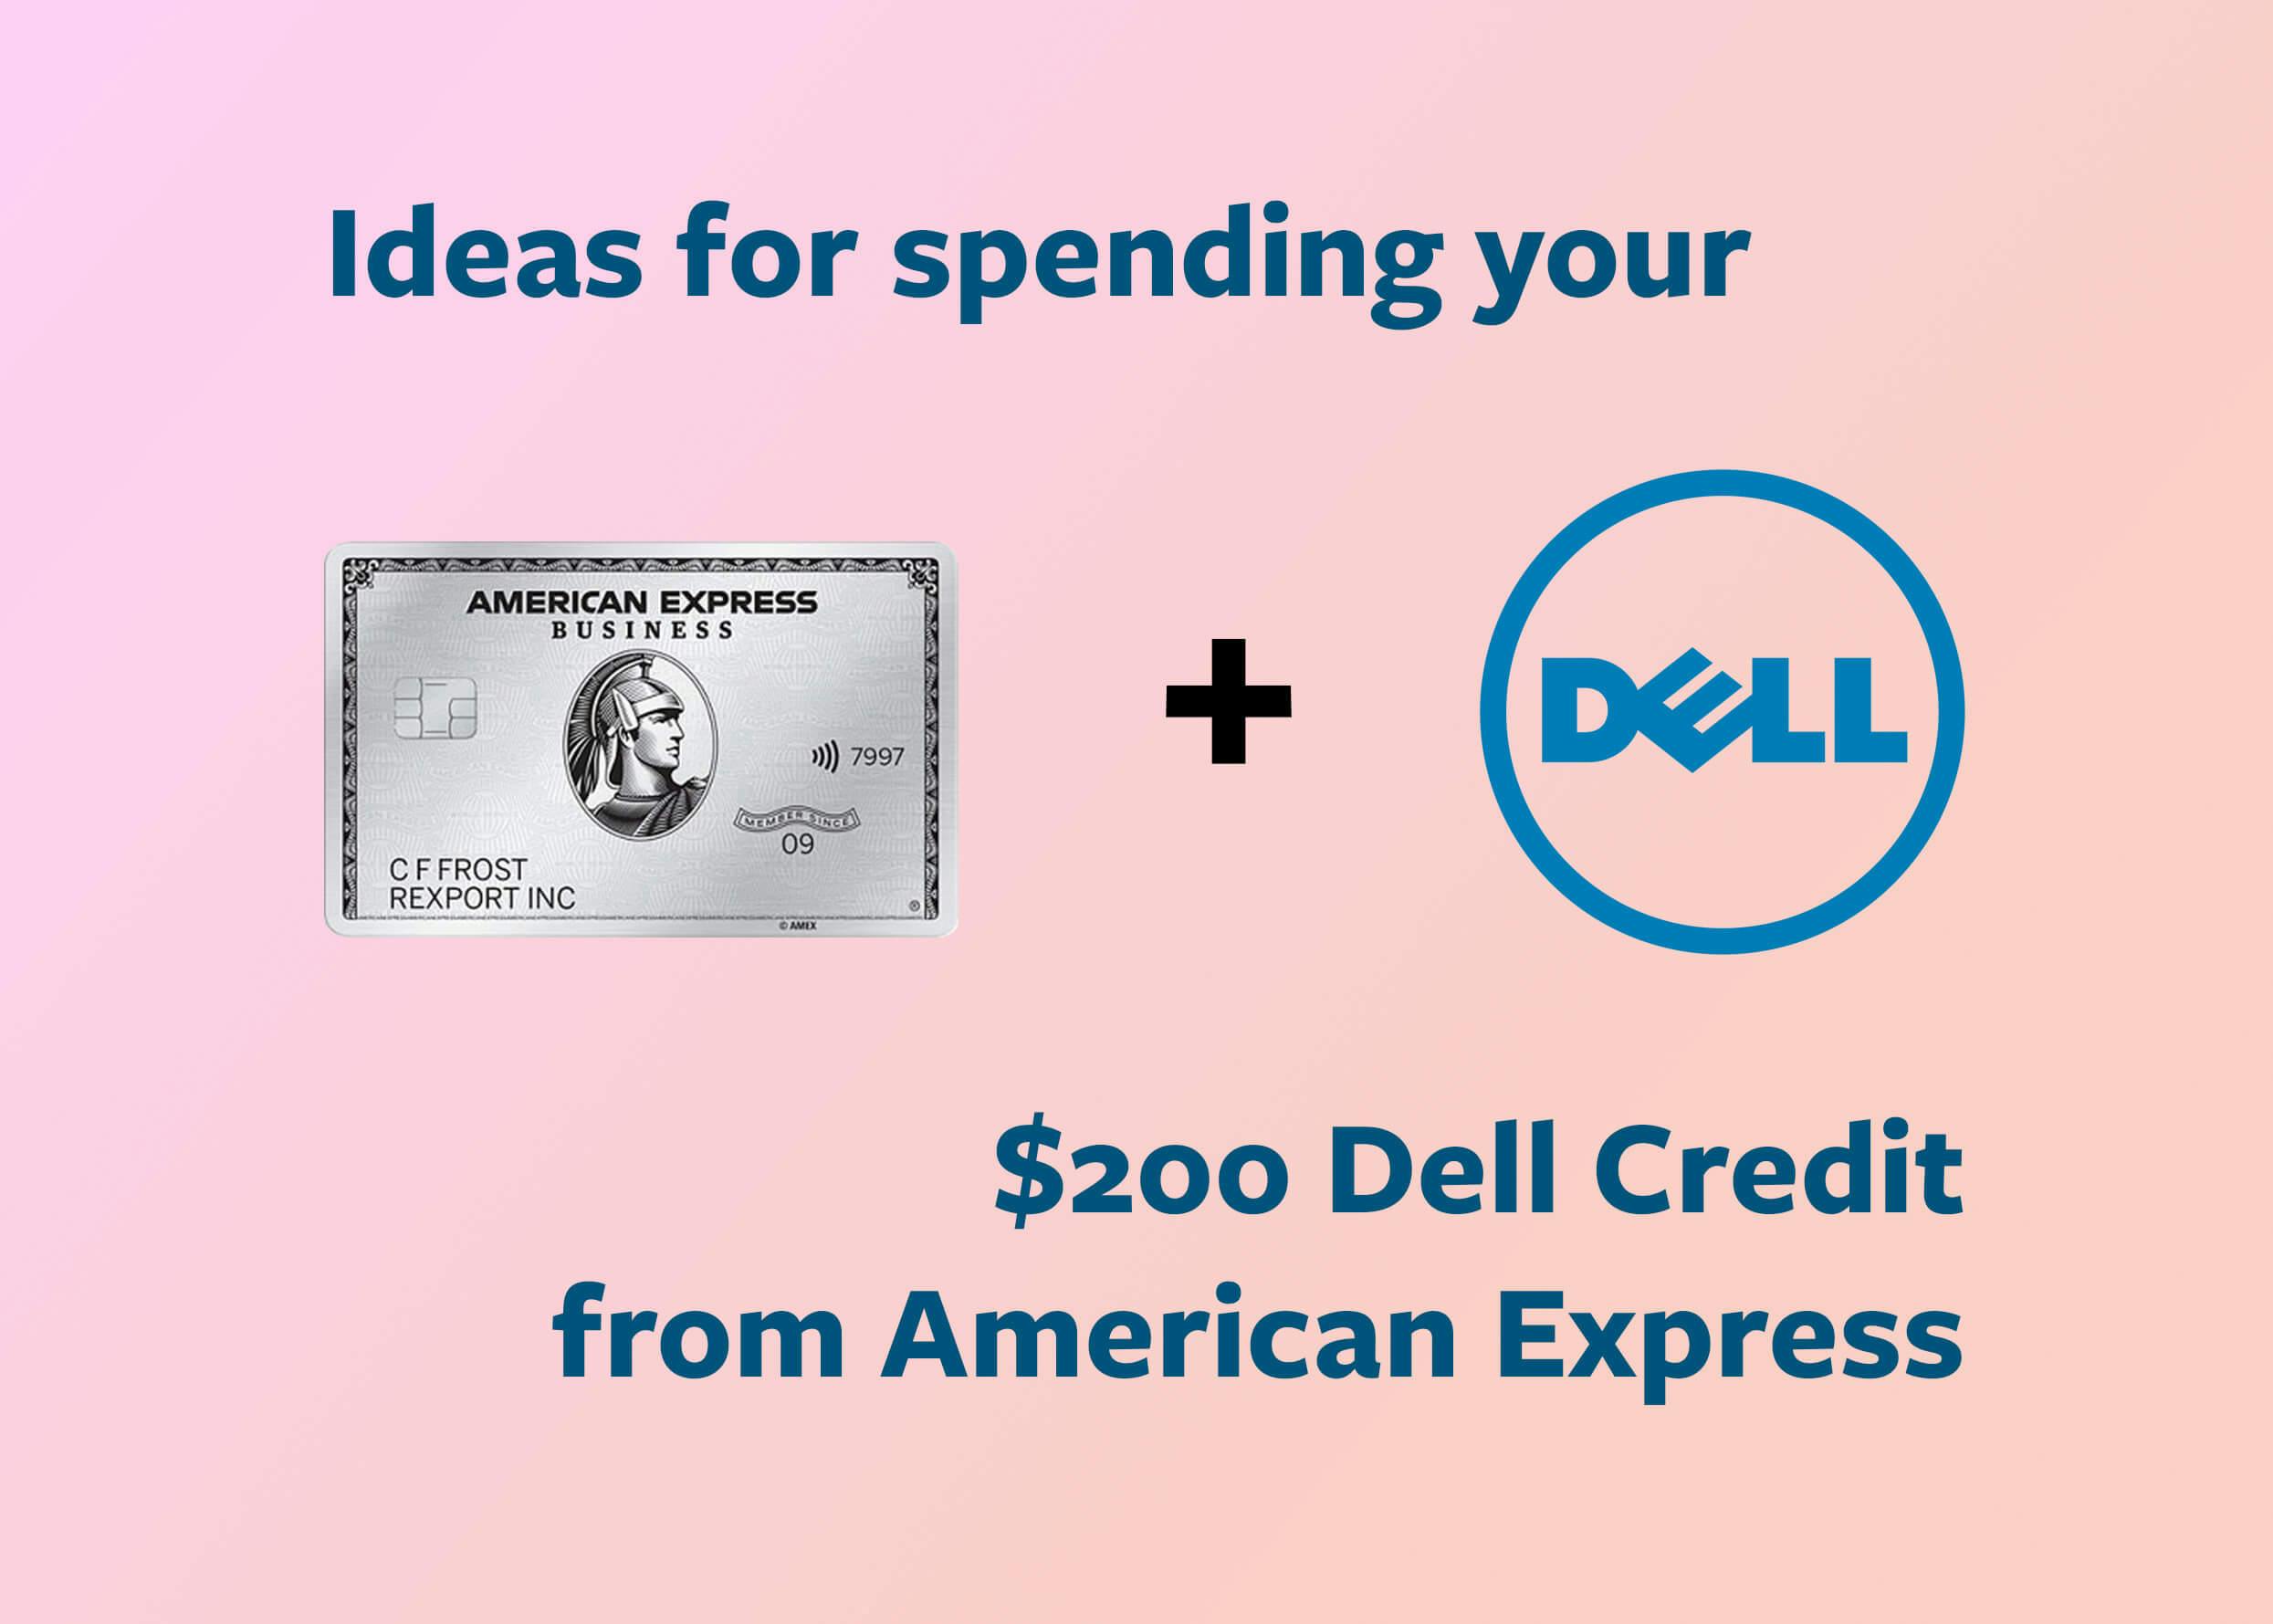 american express and dell logos